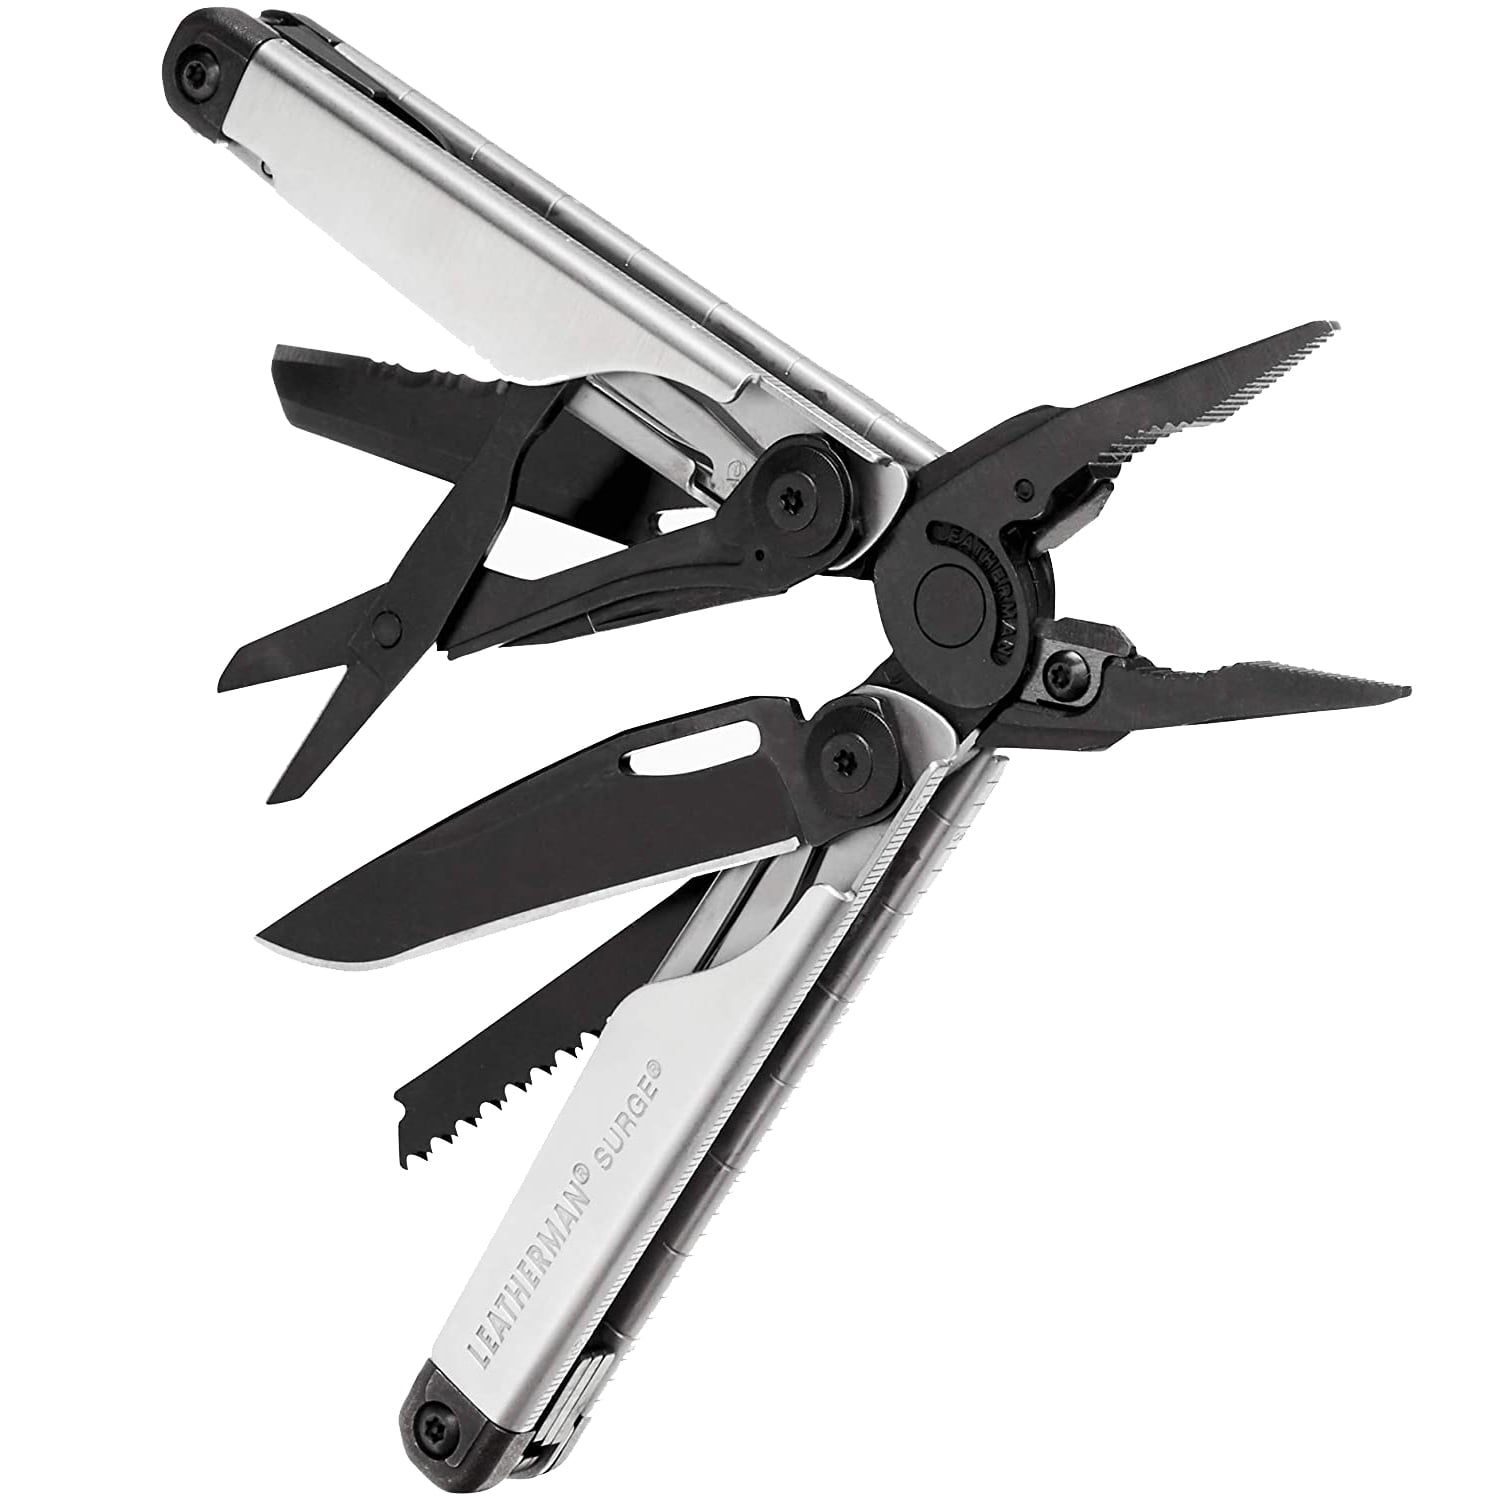 LEATHERMAN Surge Multi-Tool, Limited Edition Black/Silver with